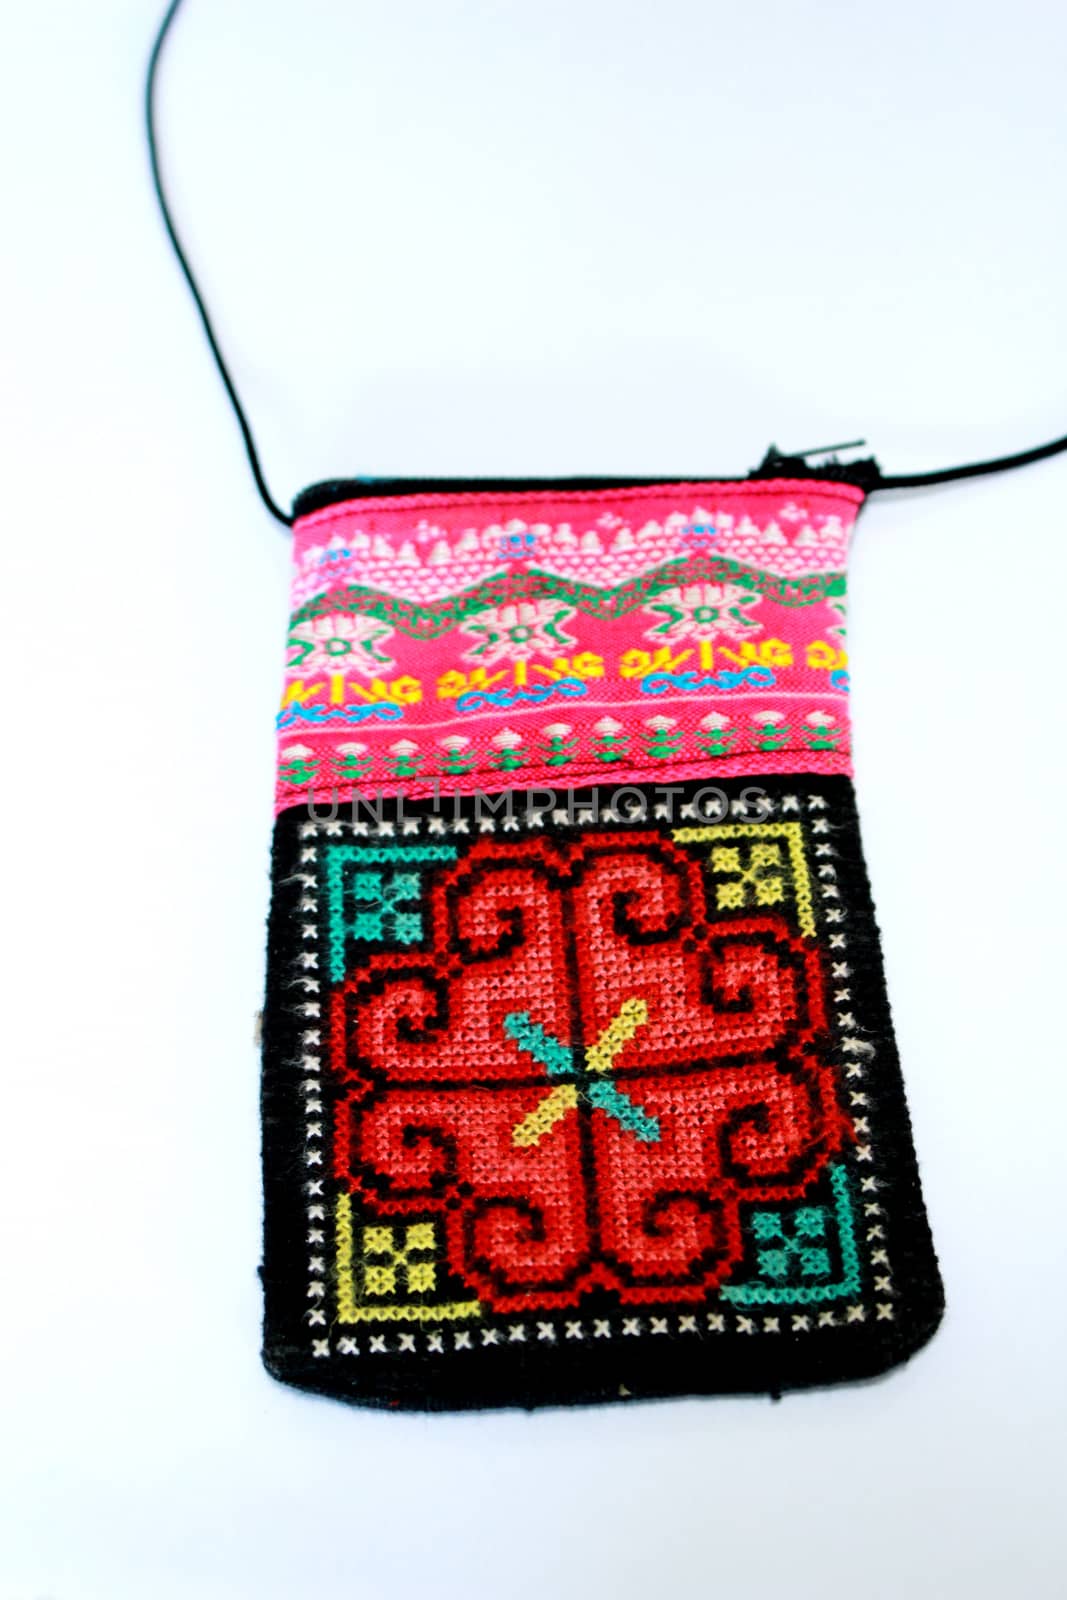 hill tribe bag by kaidevil